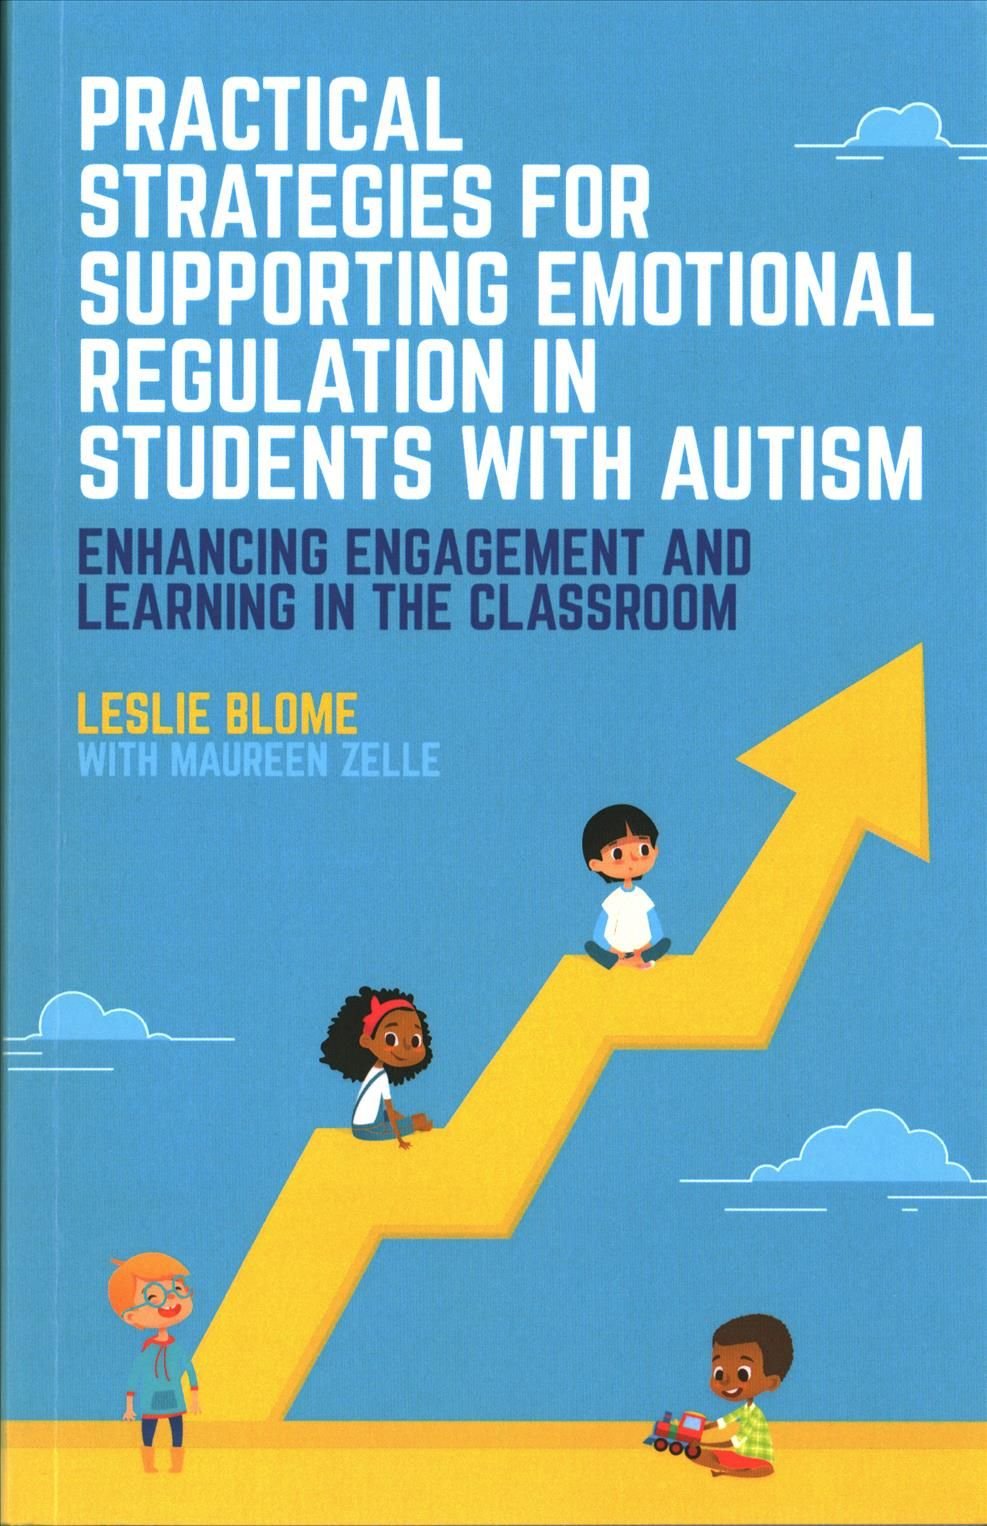 Practical Strategies for Supporting Emotional Regulation in Students with Autism